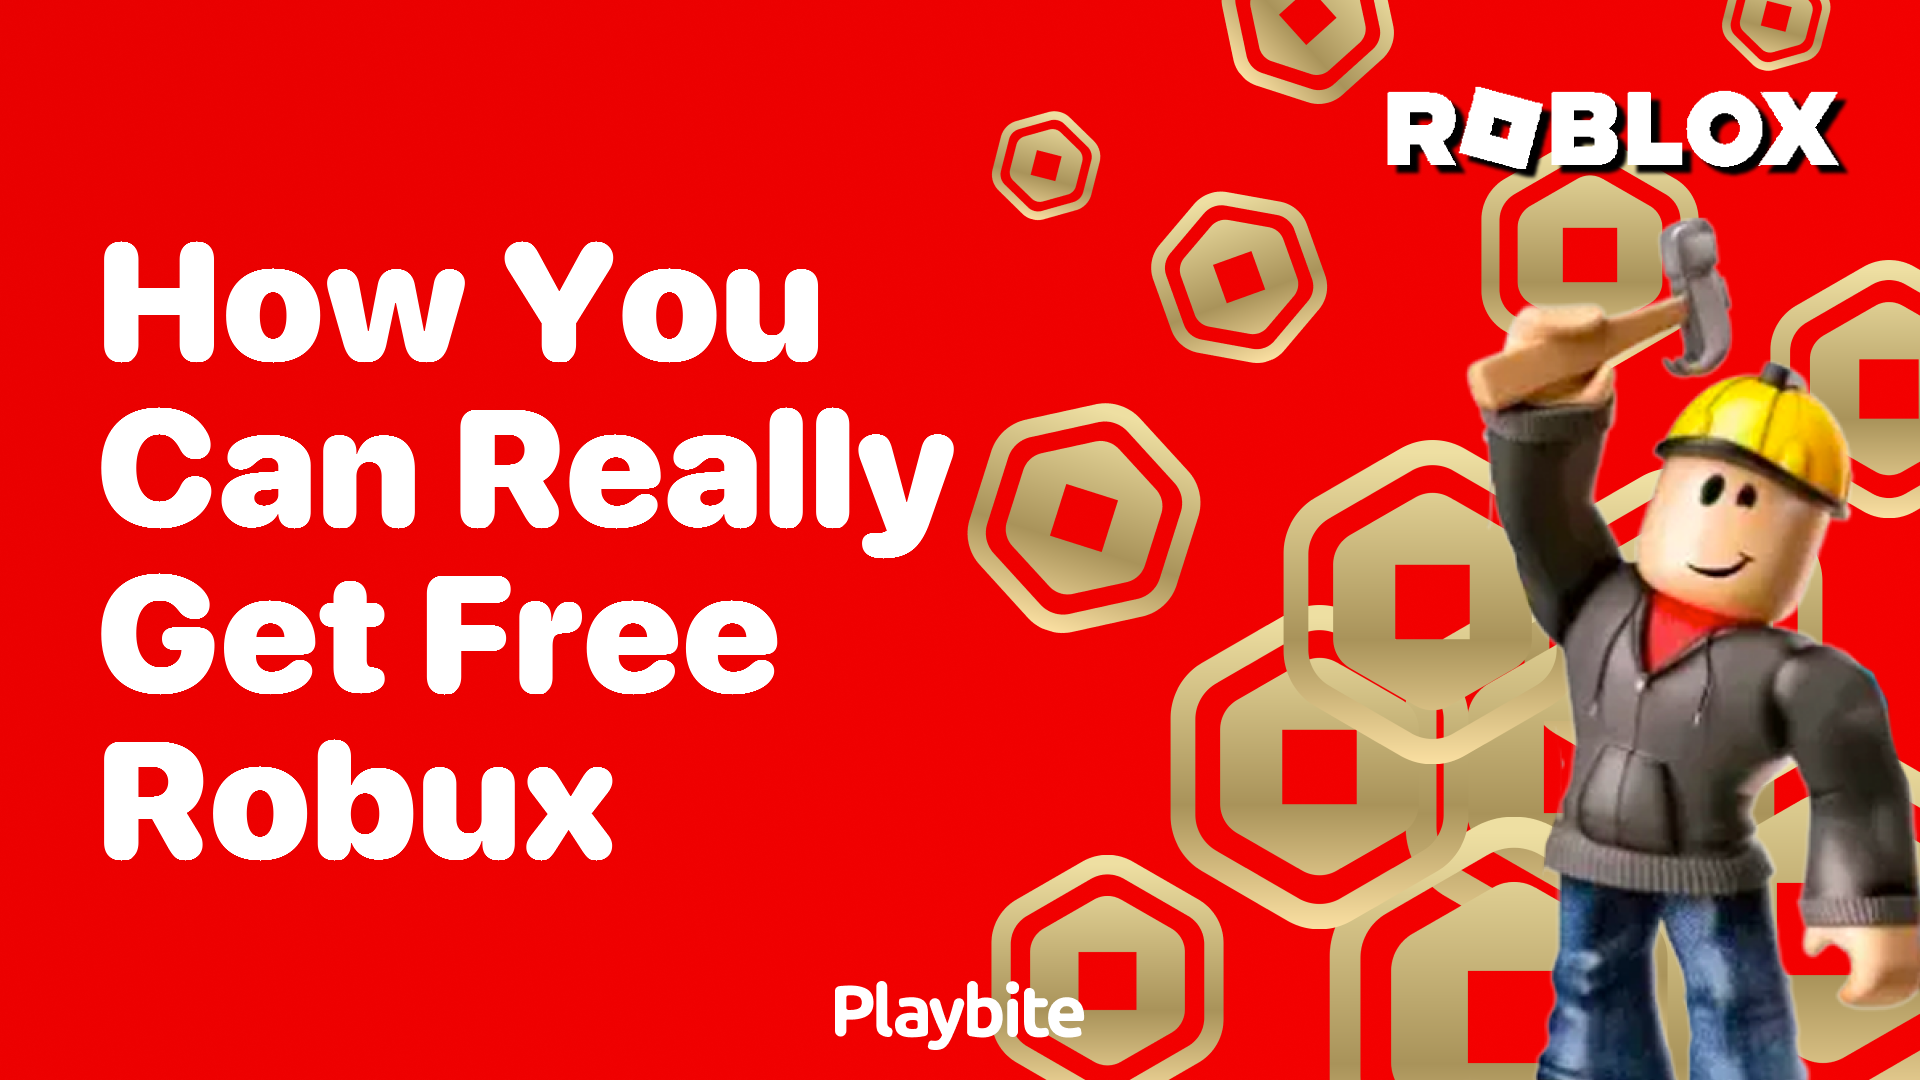 How You Can Really Get Free Robux - Playbite